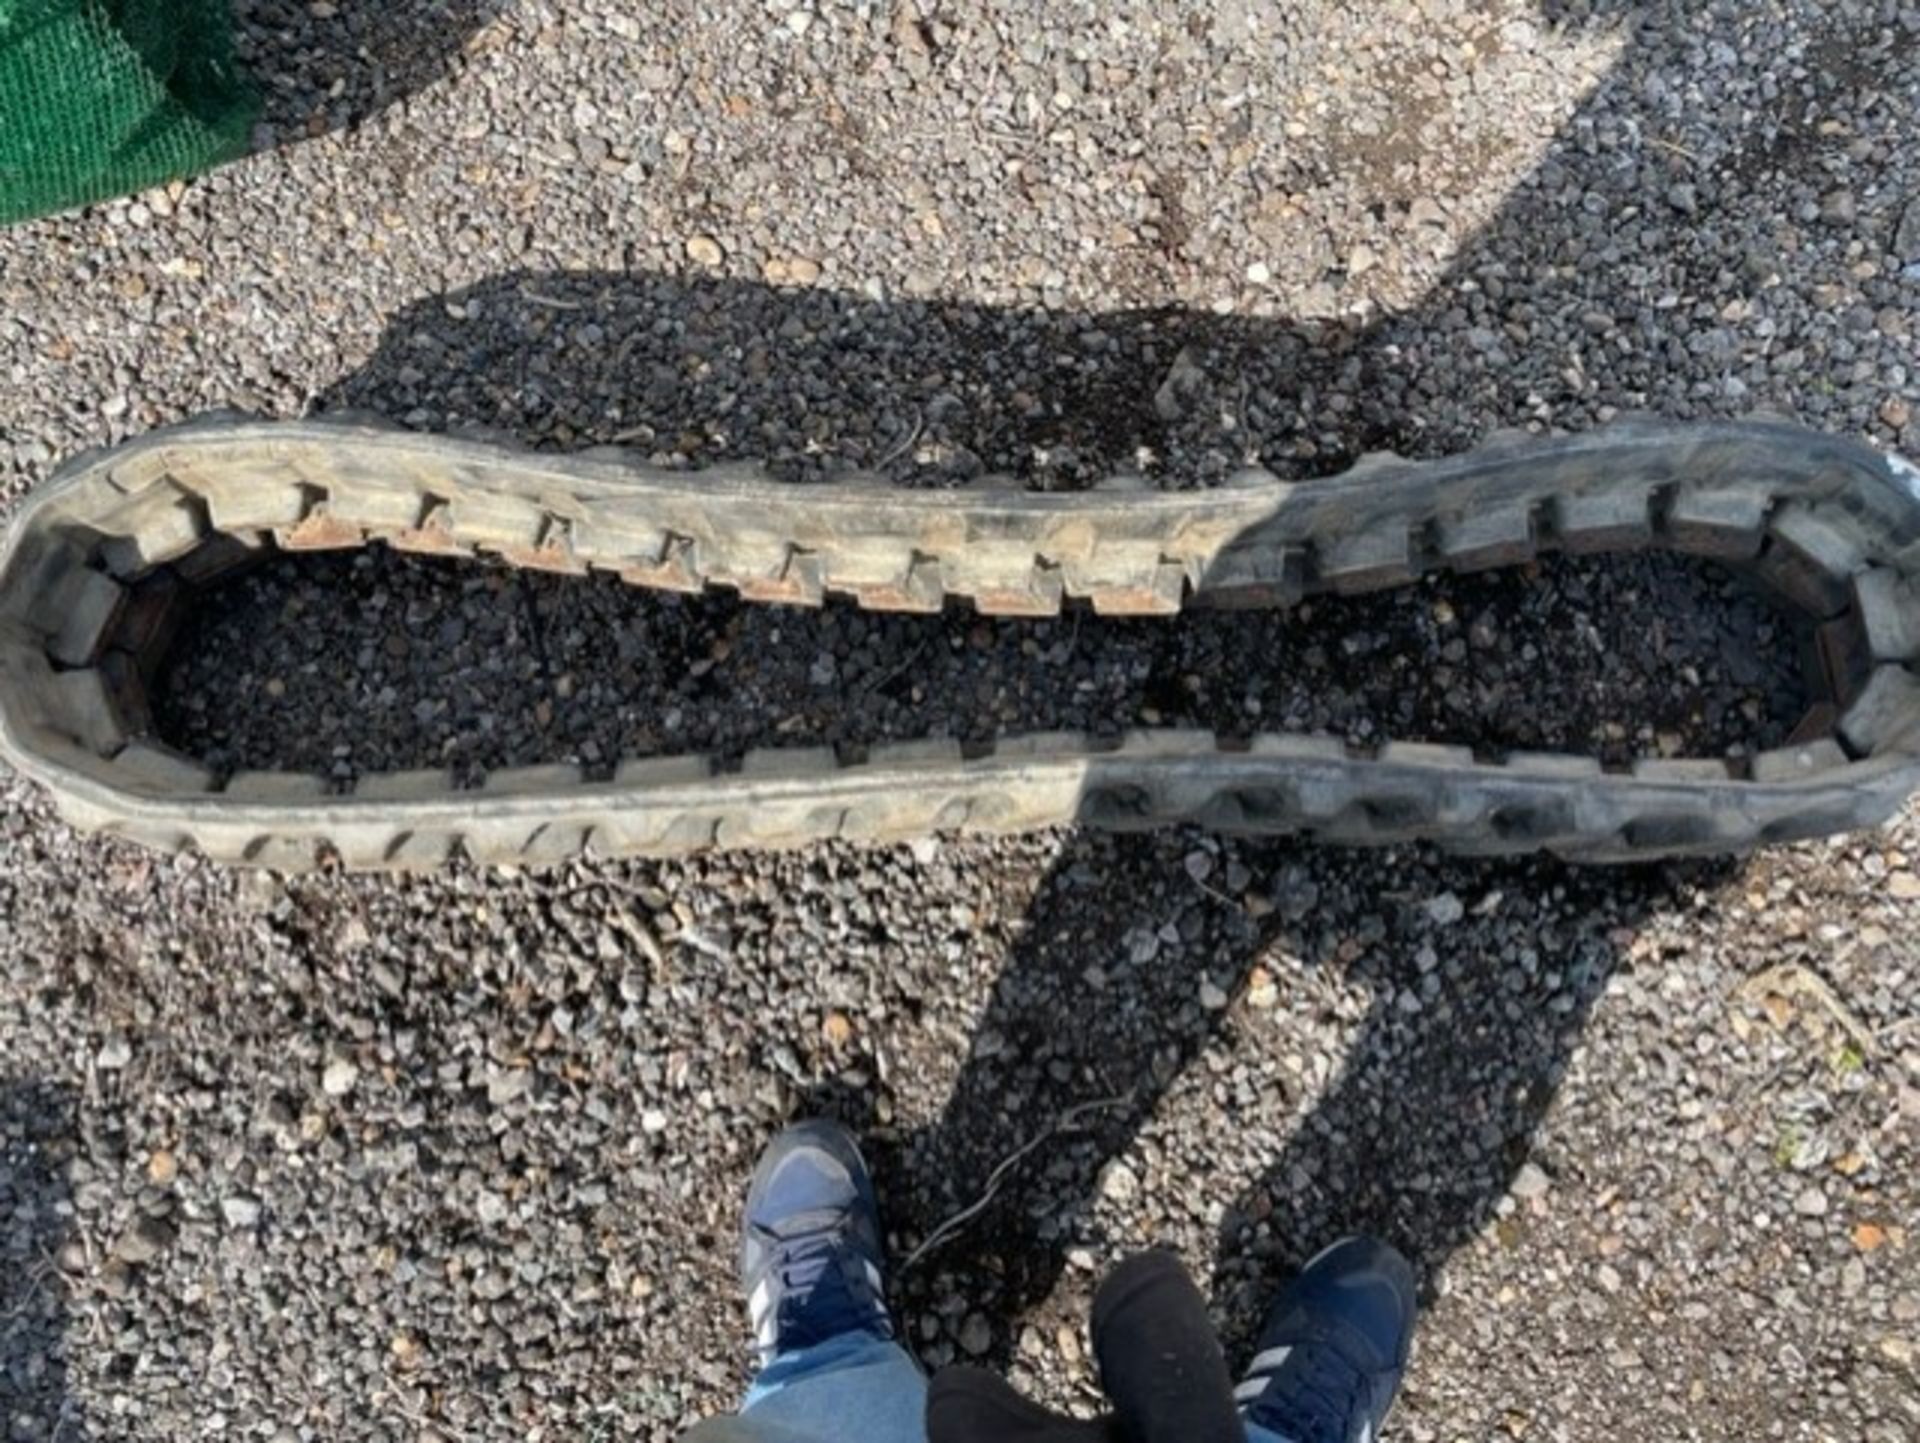 Mini excavator track in good condition has number 5061549 if helpful can measure if interested - Image 3 of 3